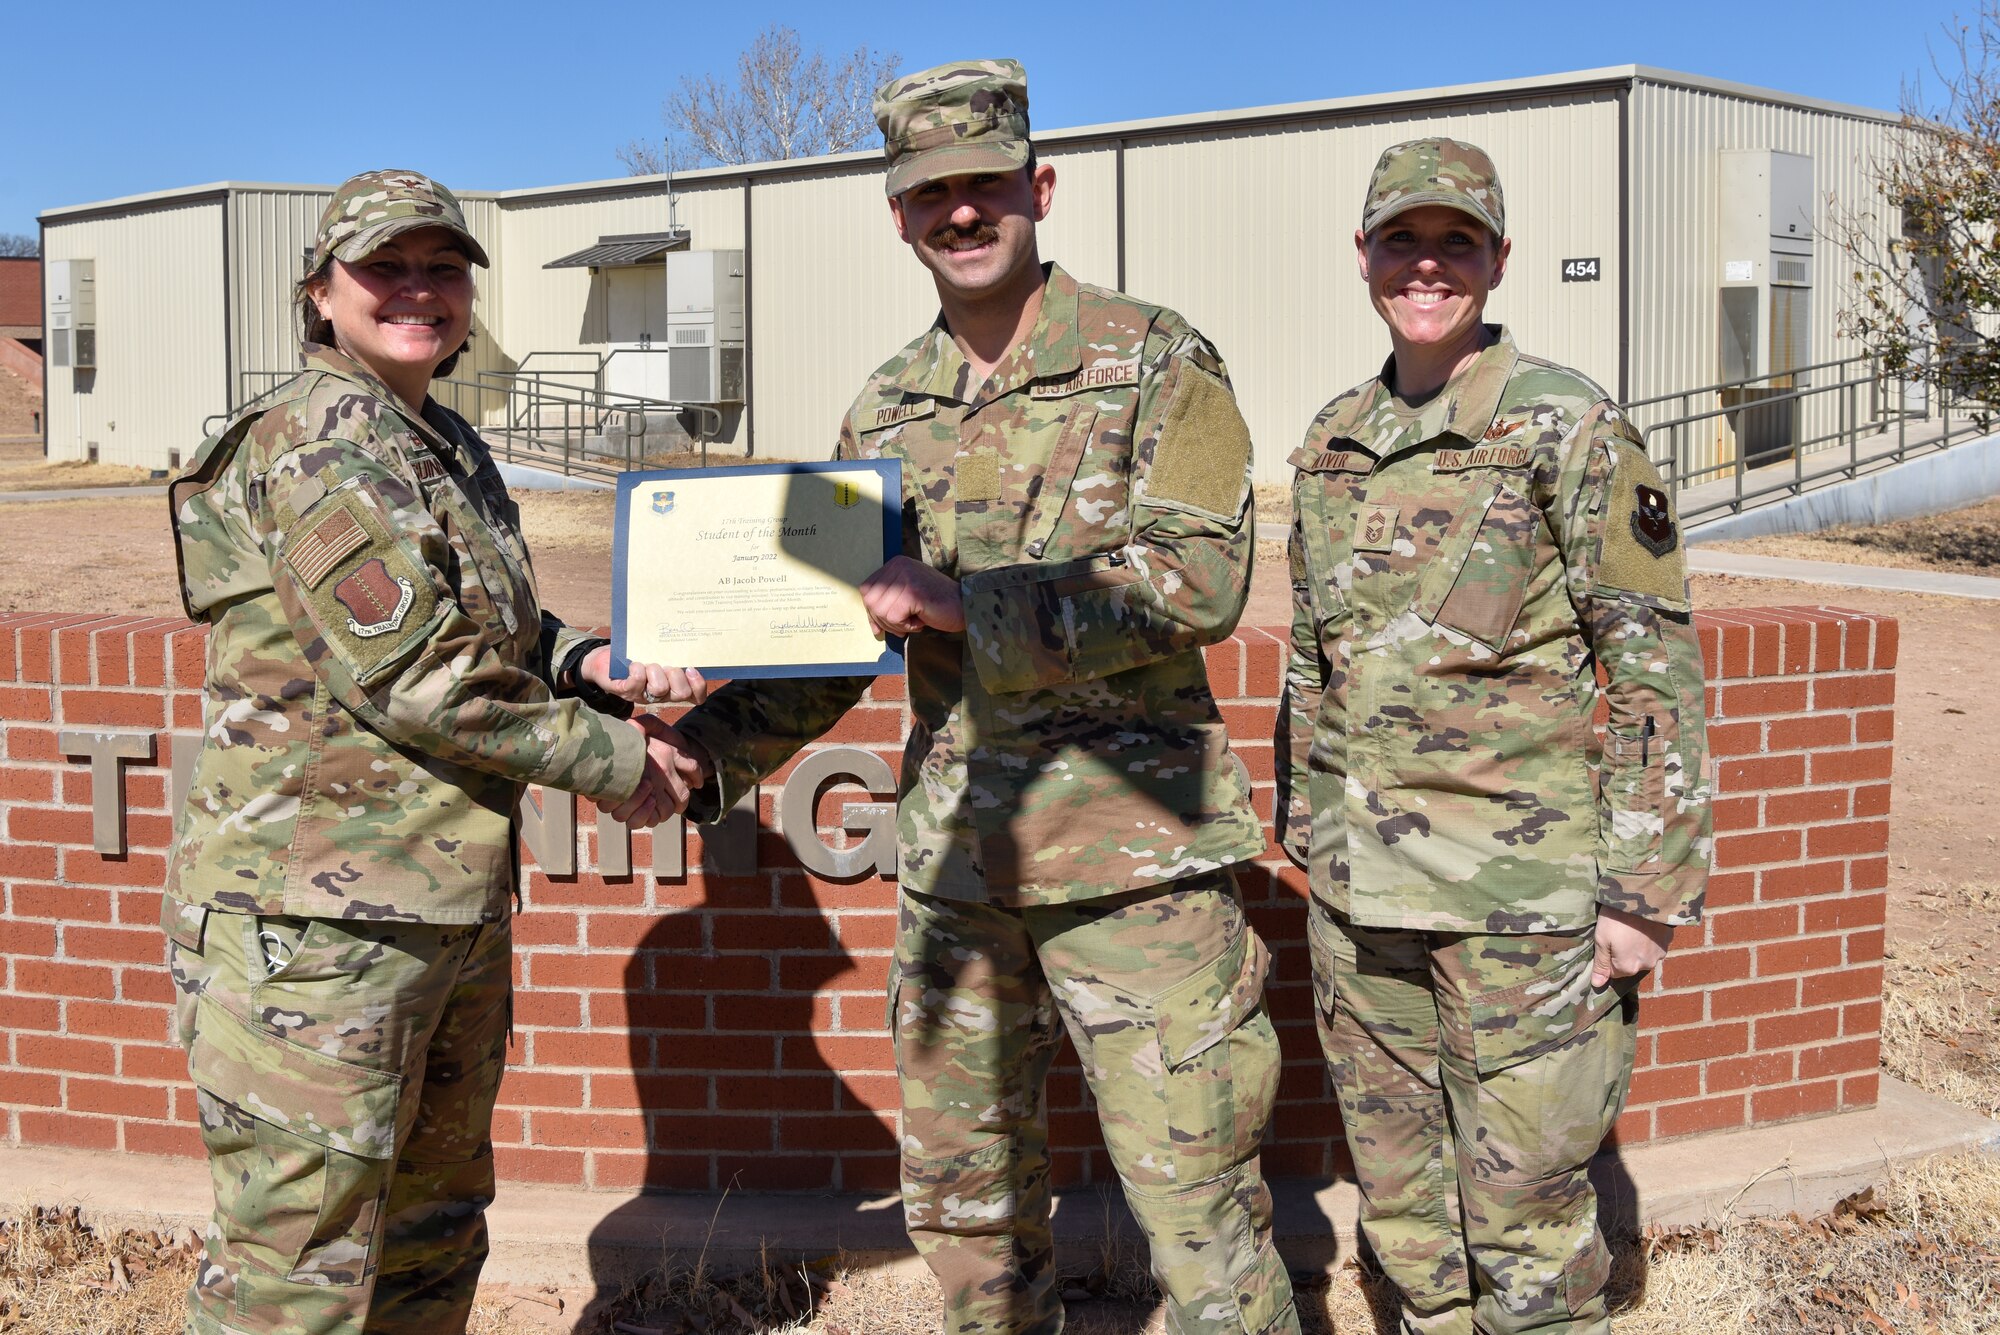 U.S. Air Force Col. Angelina Maguinness, 17th Training Group commander, and Chief Master Sgt. Breana Oliver, 17th TRG superintendent, presents Airman Jacob Powell, 312th Training Squadron student, a 17th TRG Student of the Month award for January 2022, outside of Brandenburg Hall, Goodfellow Air Force Base, Texas, Feb. 18, 2022. The 312th TRS’s mission is to train, develop, and inspire warriors to deliver Fire Emergency Services and Nuclear Treaty Monitoring for the Department of Defense. (U.S. Air Force photo by Staff Sgt. Jermaine Ayers)